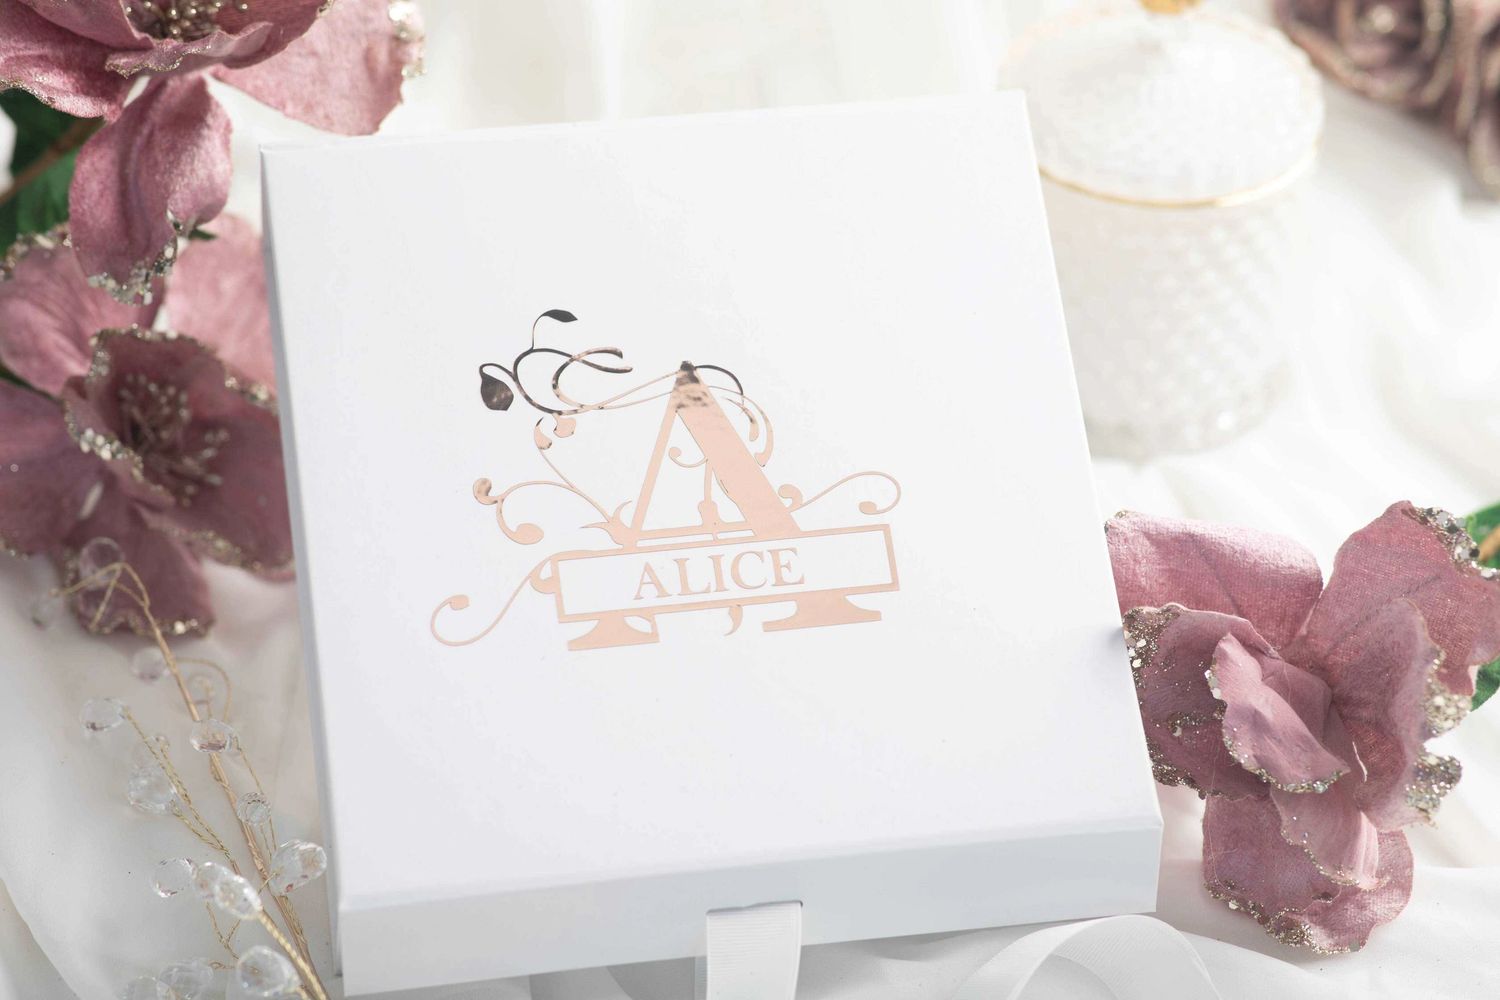 White gift box with ribbon decorated with a monogram and name decal in Champagne chrome